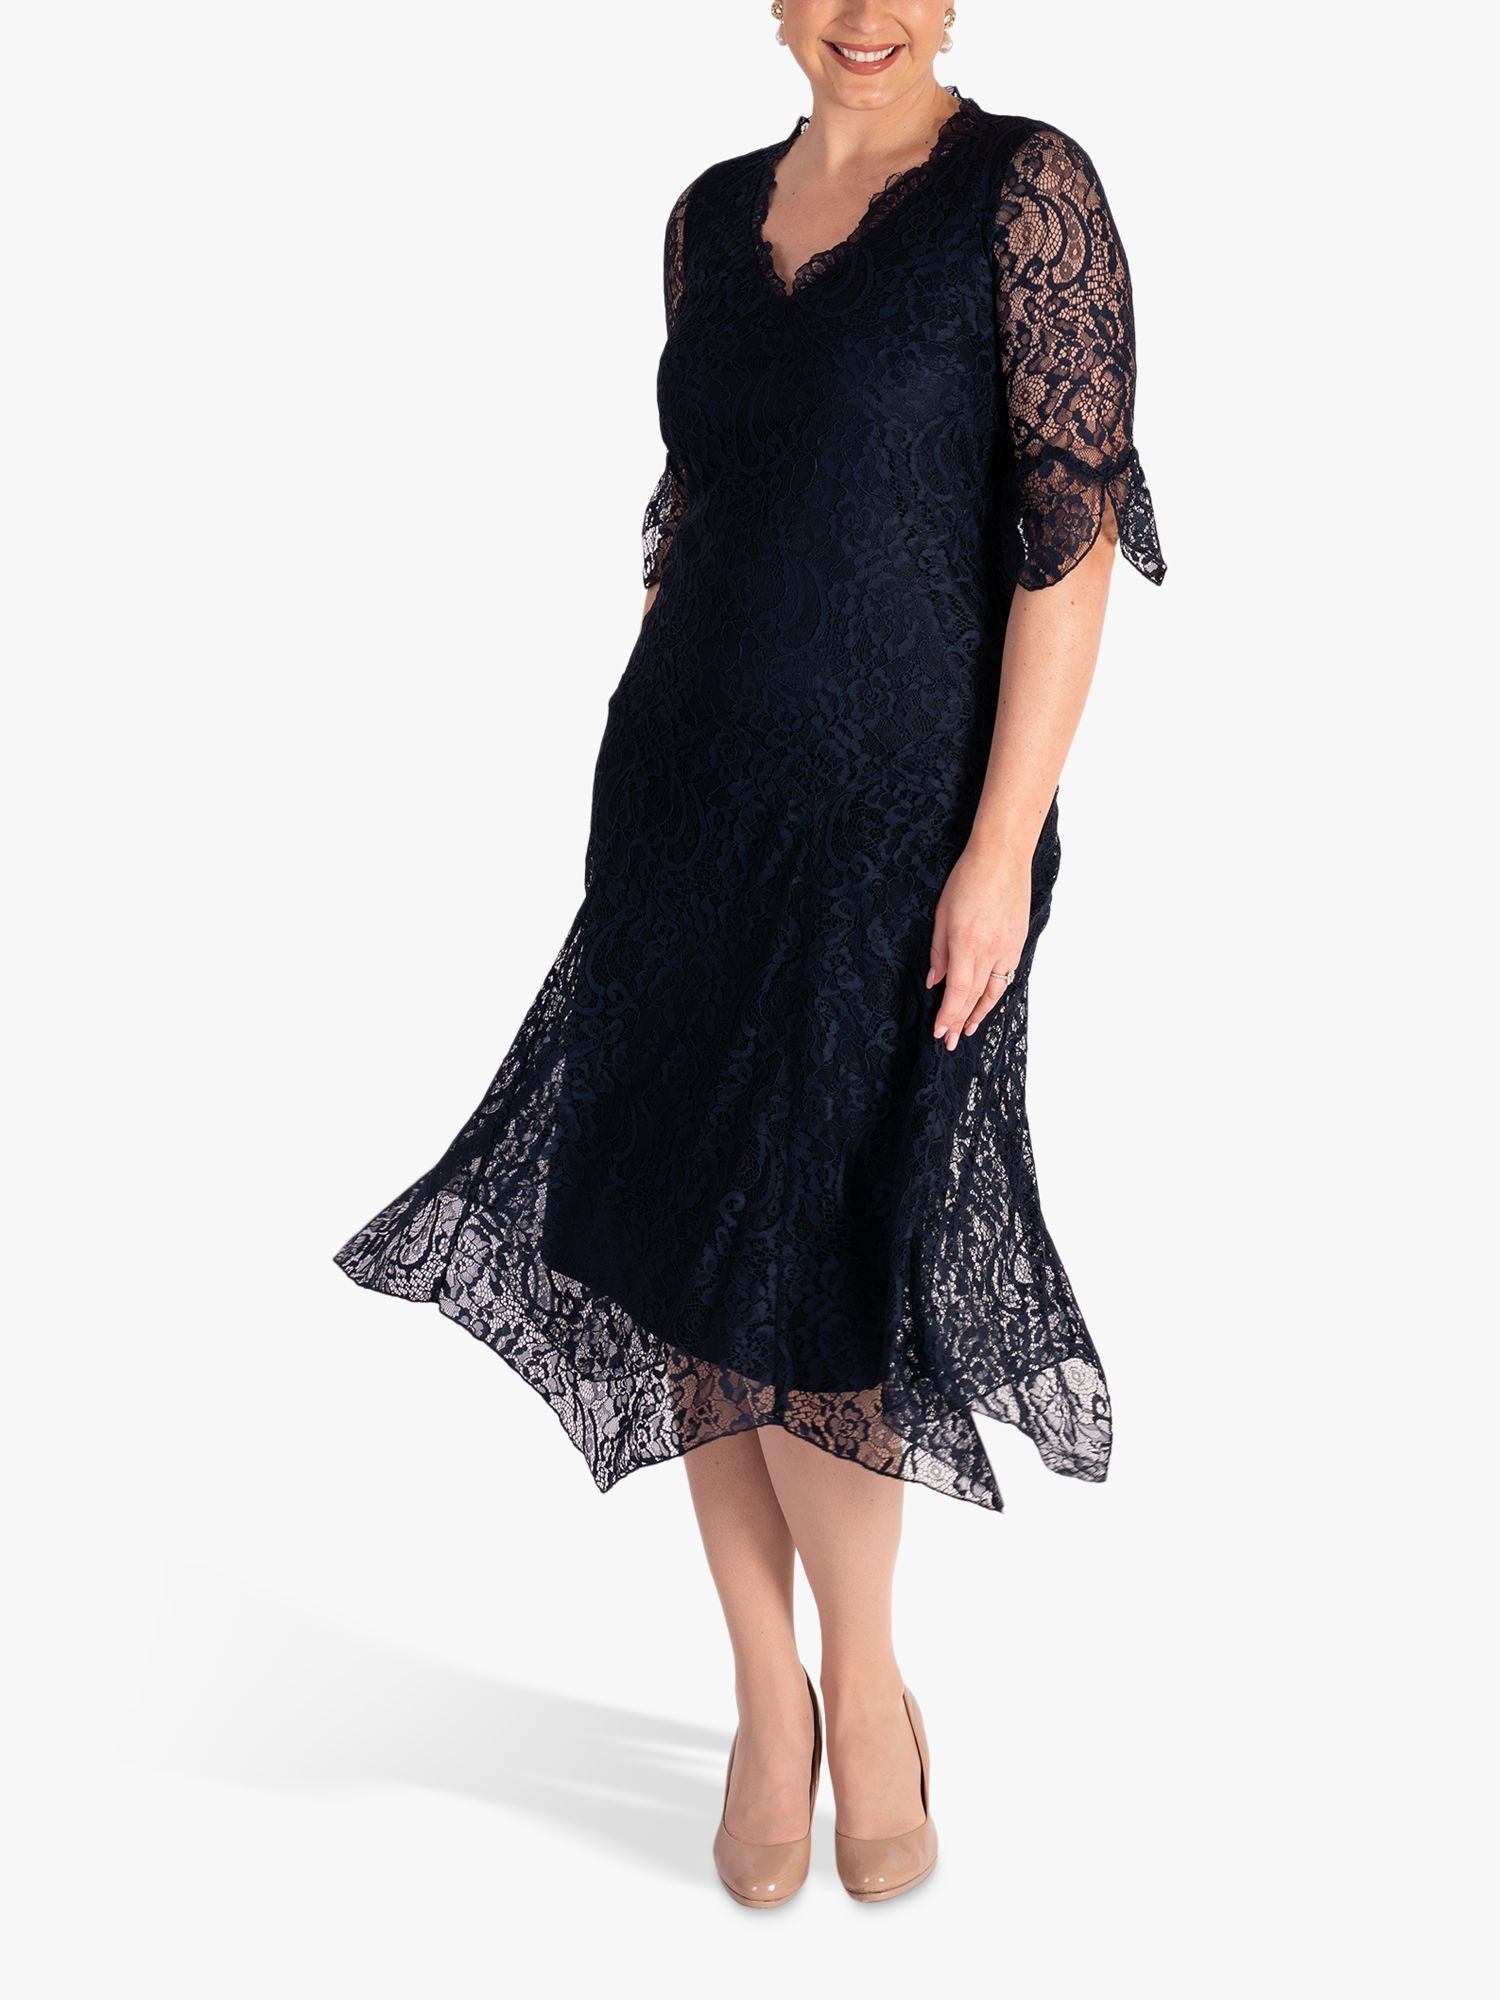 chesca Lace Dress, Navy at John Lewis & Partners